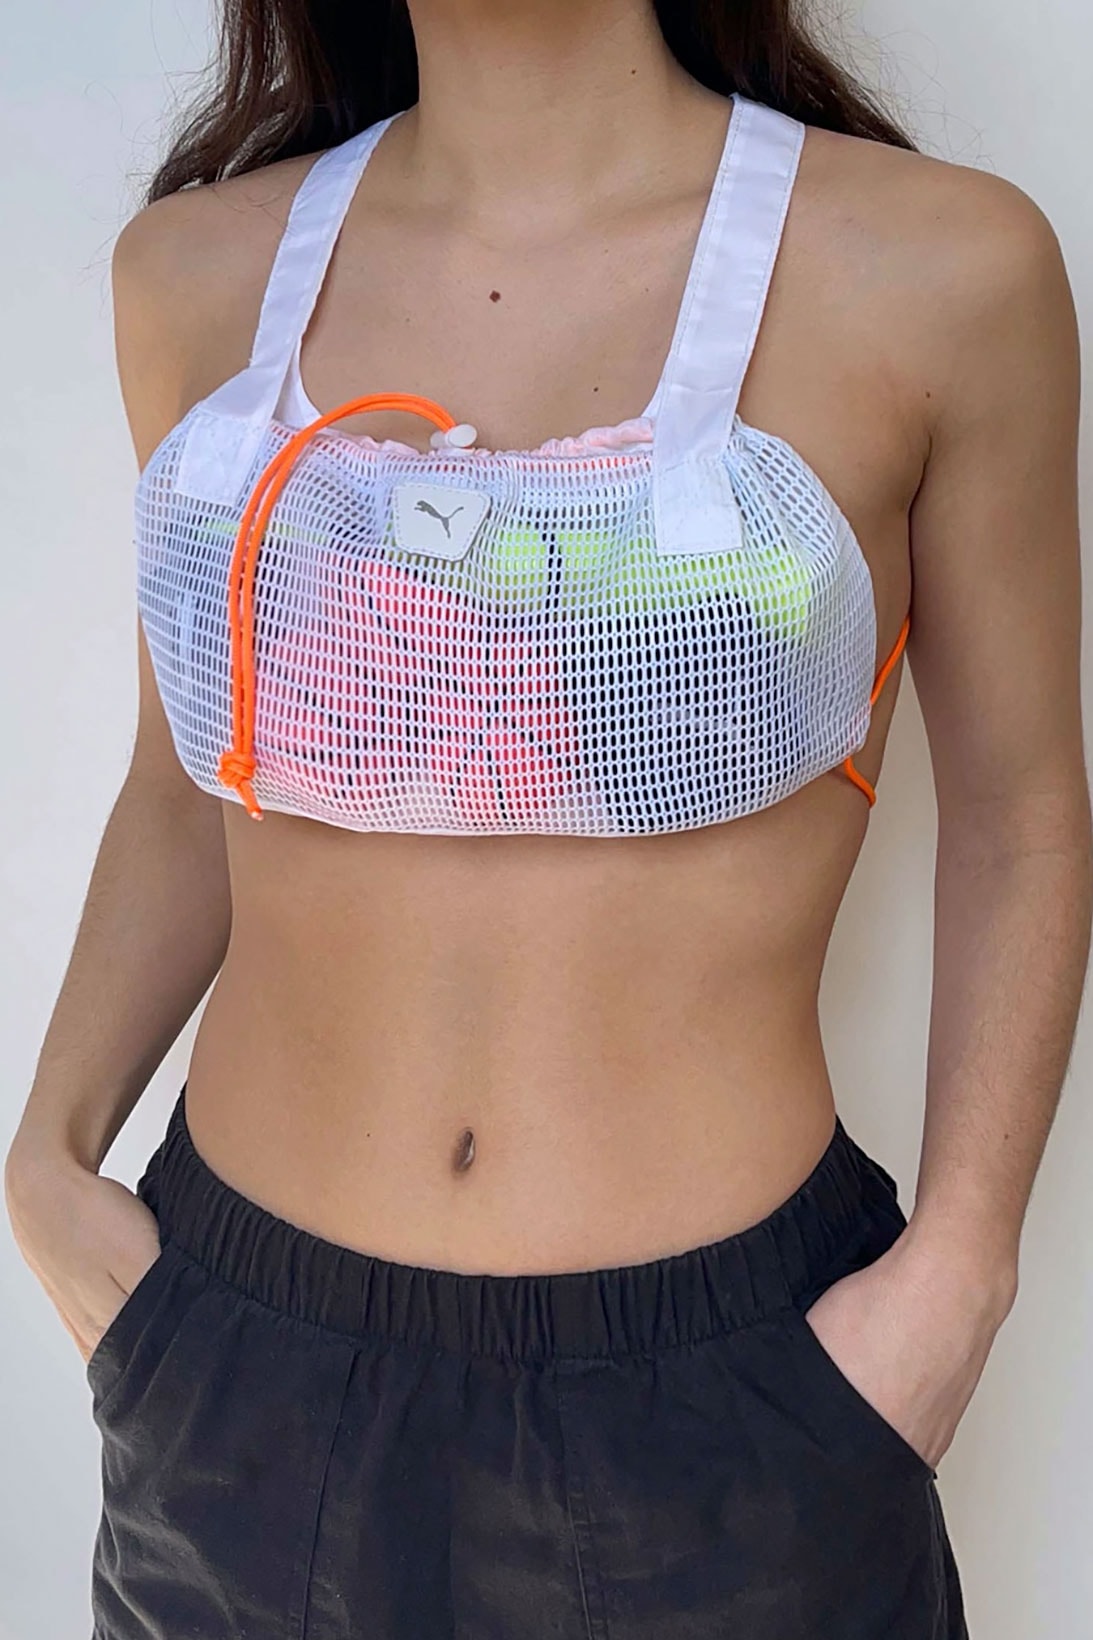 nicole mclaughlin puma upcycled sports bras collaboration women win white